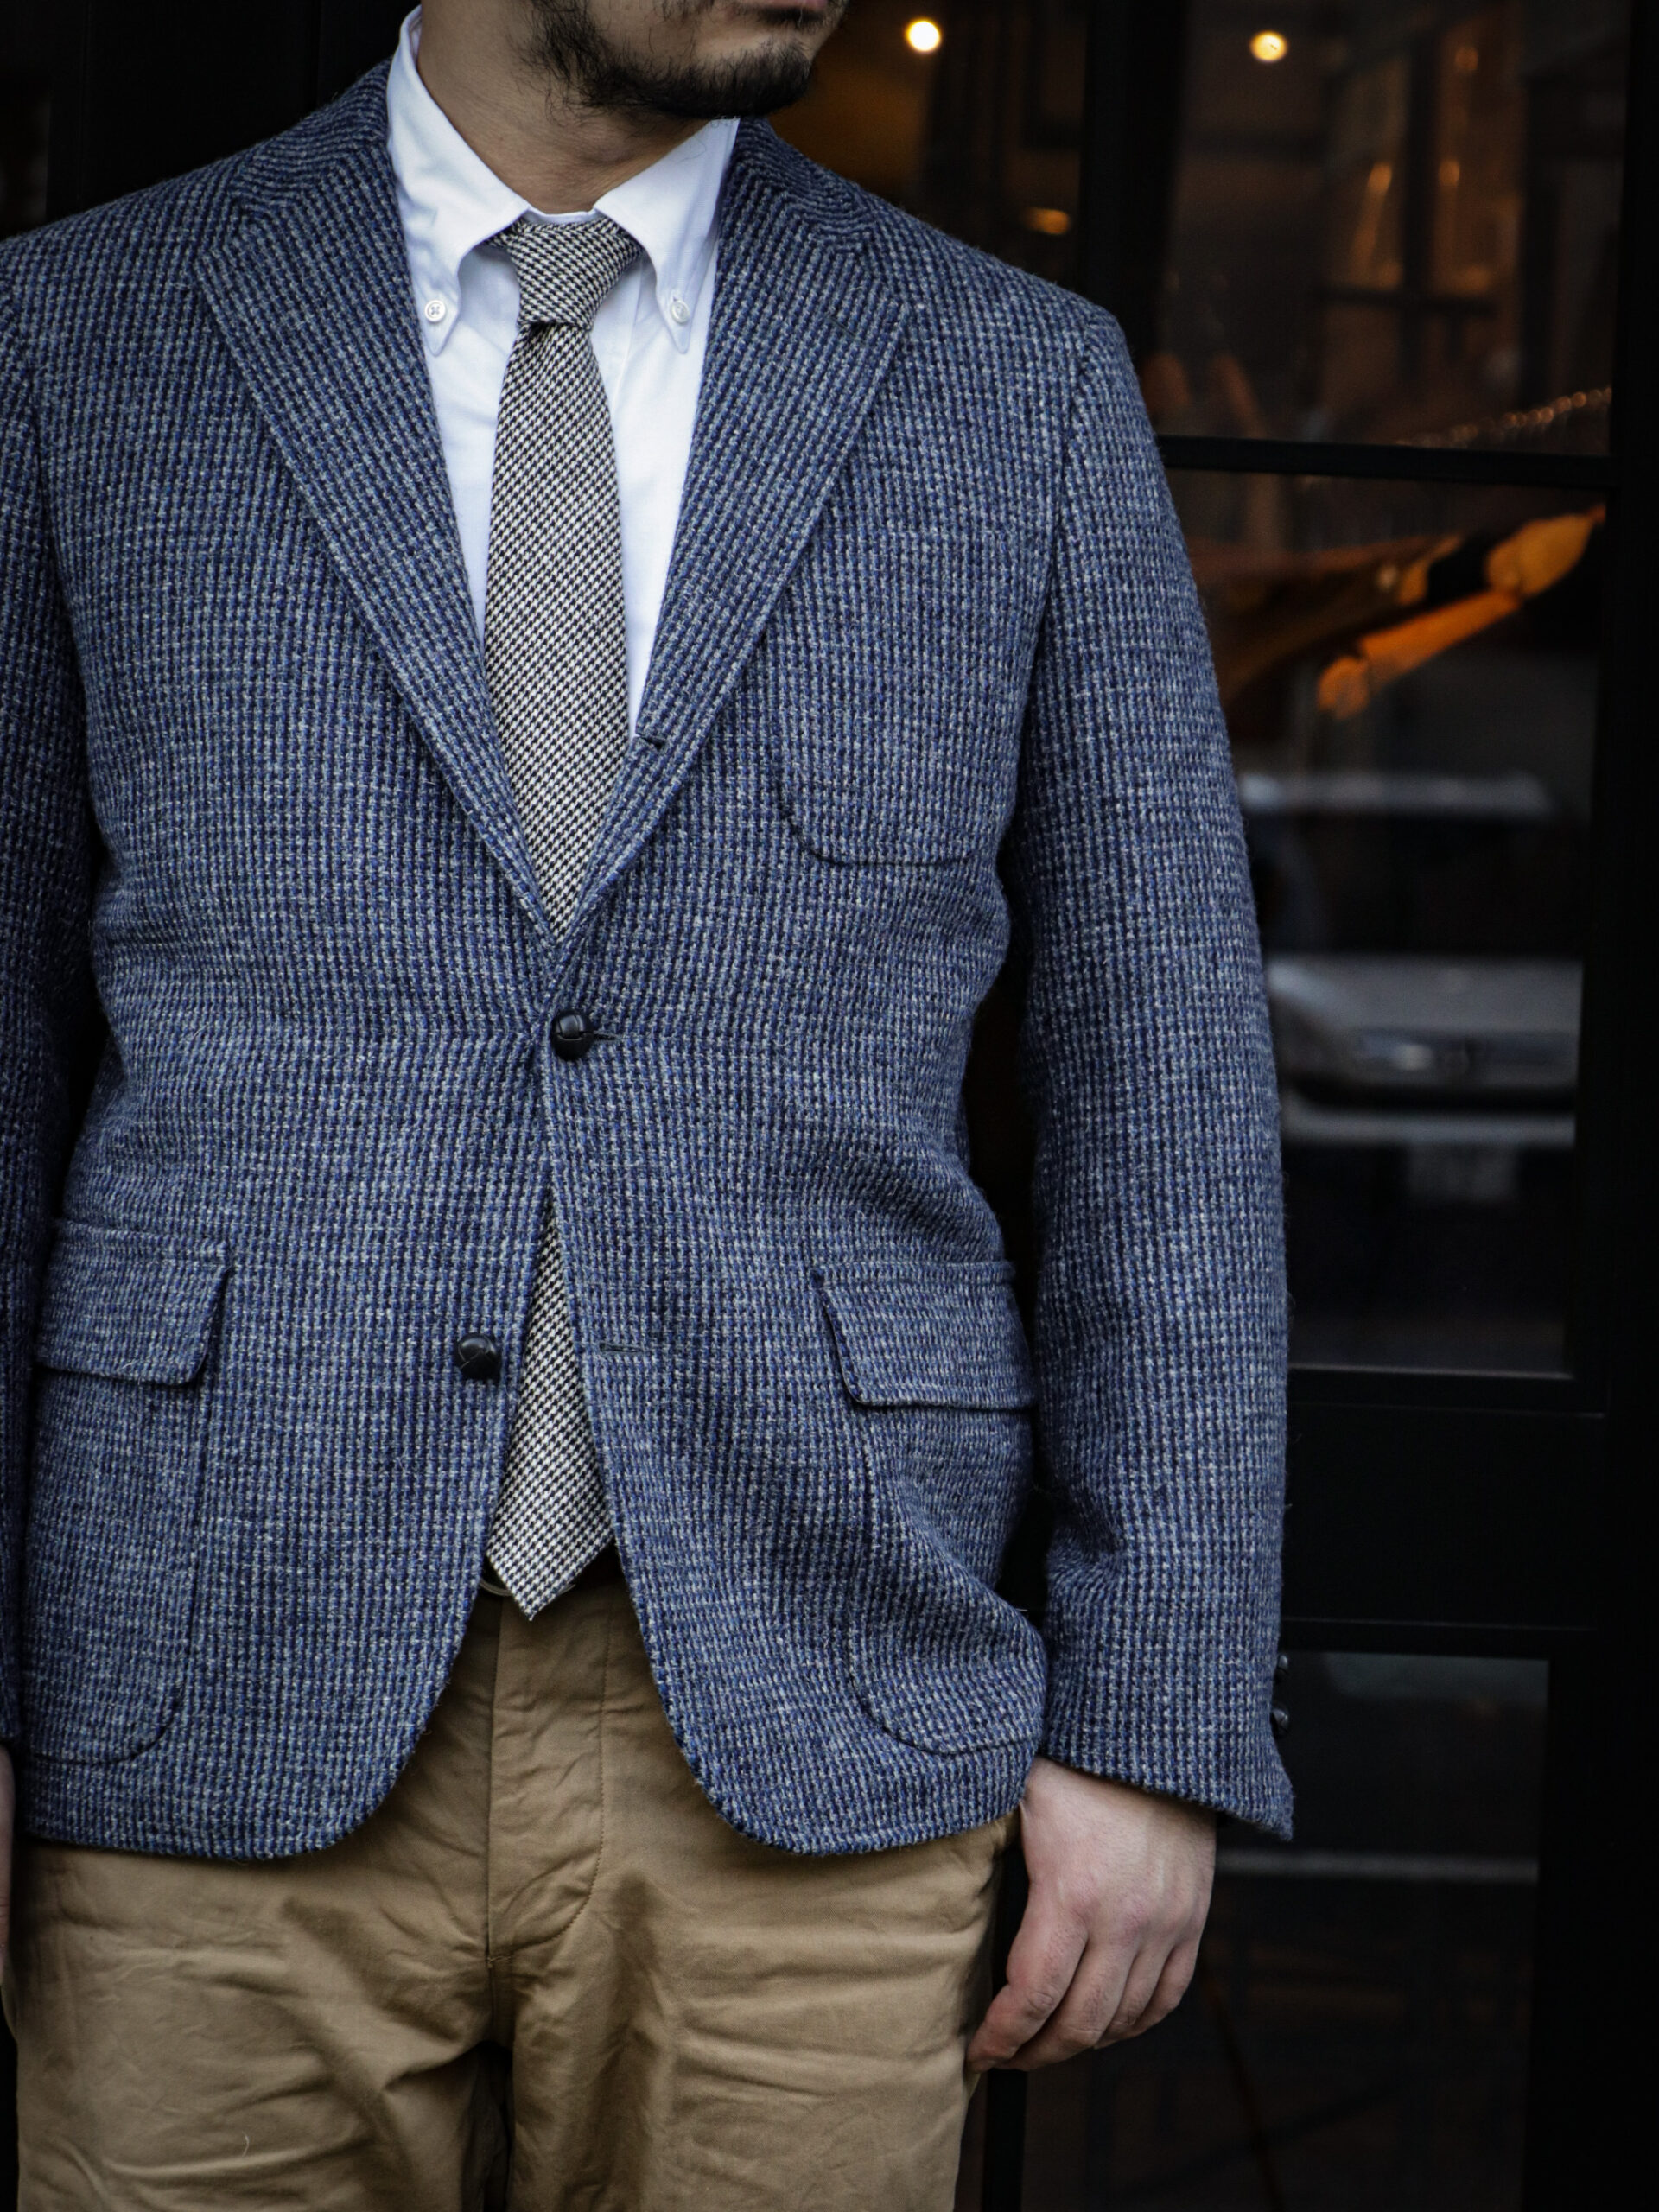 BONCOURA / Tailored Jacket | ARCH 米村屋